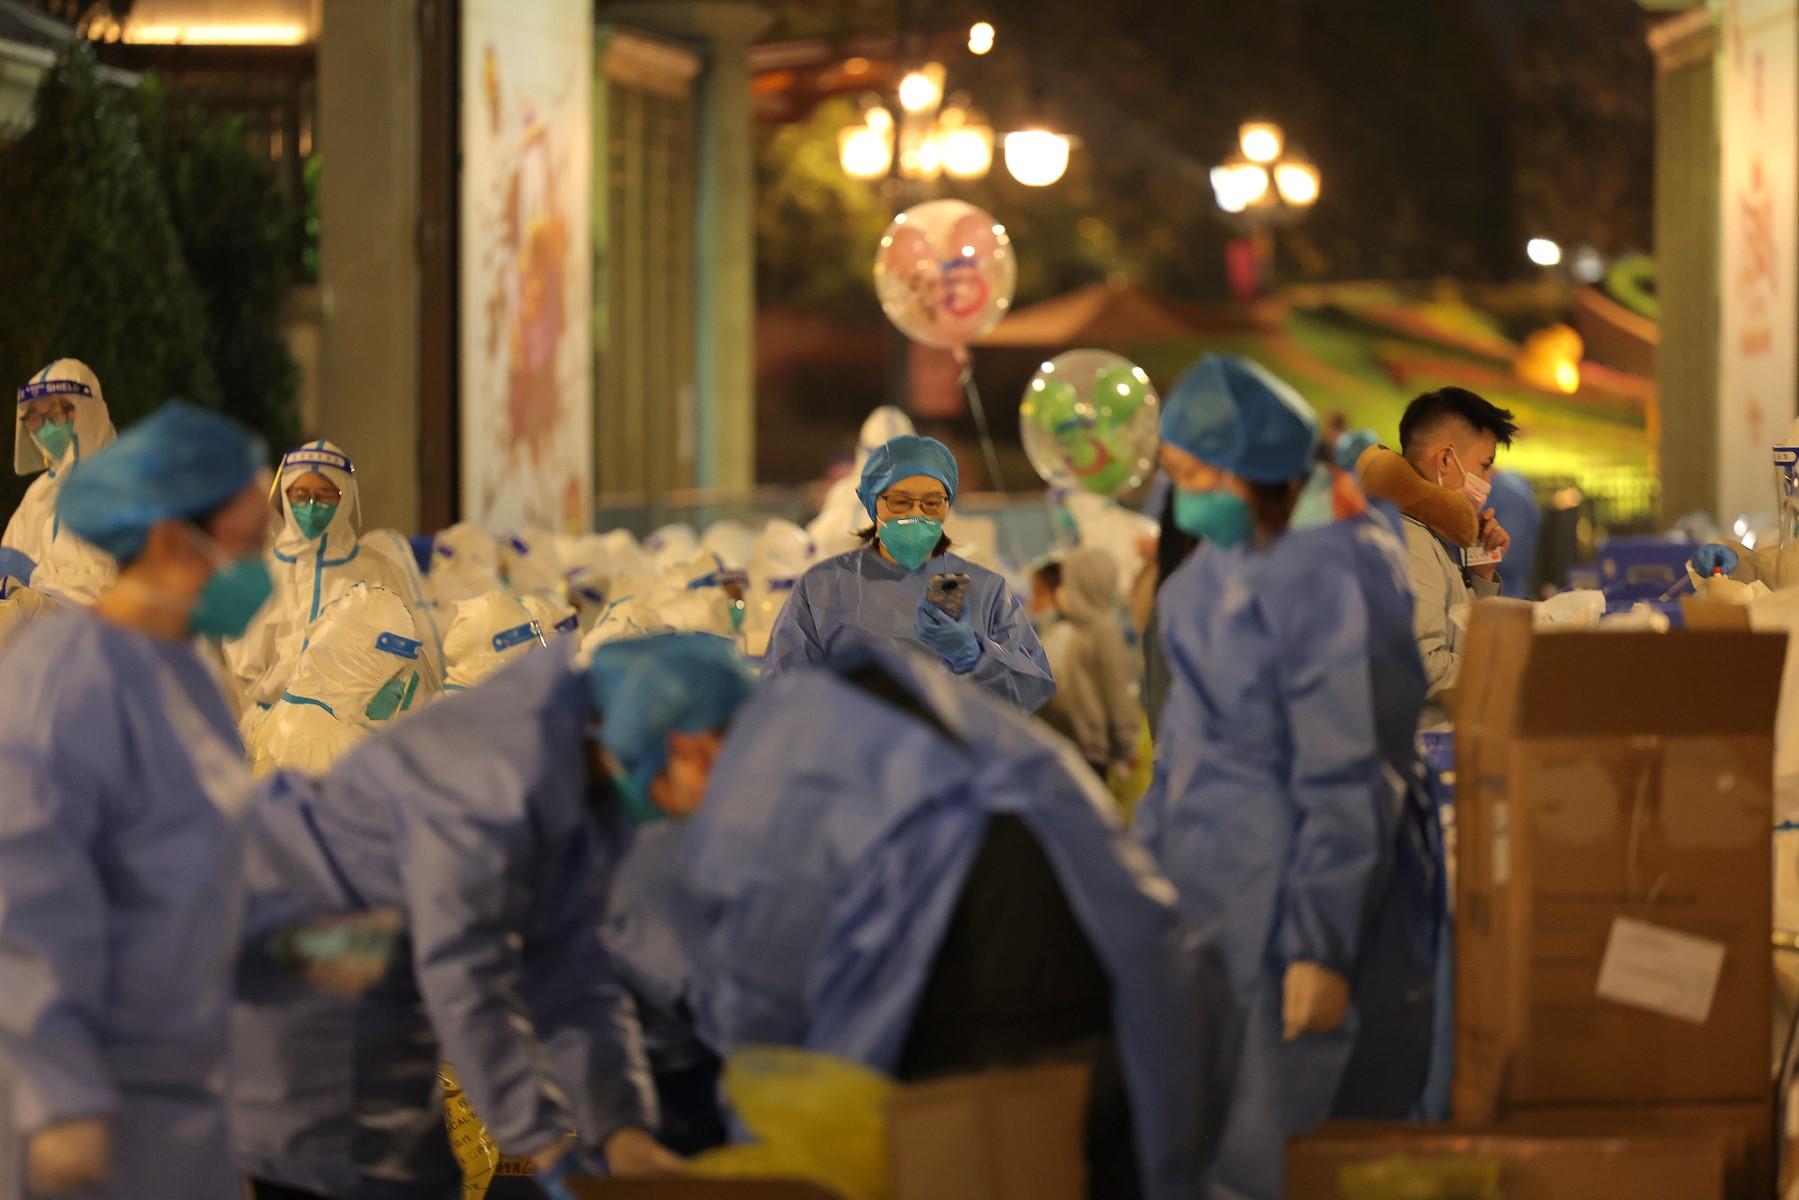 This photo taken on Oct 31, 2021 shows medical personnel preparing to test visitors for the Covid-19 coronavirus at Disneyland in Shanghai. Shanghai's tourism and culture authority said travel agencies and online tourism companies must once again halt organising group tours between Shanghai and other provinces after the city reported five new domestically transmitted infections. Photo: AFP